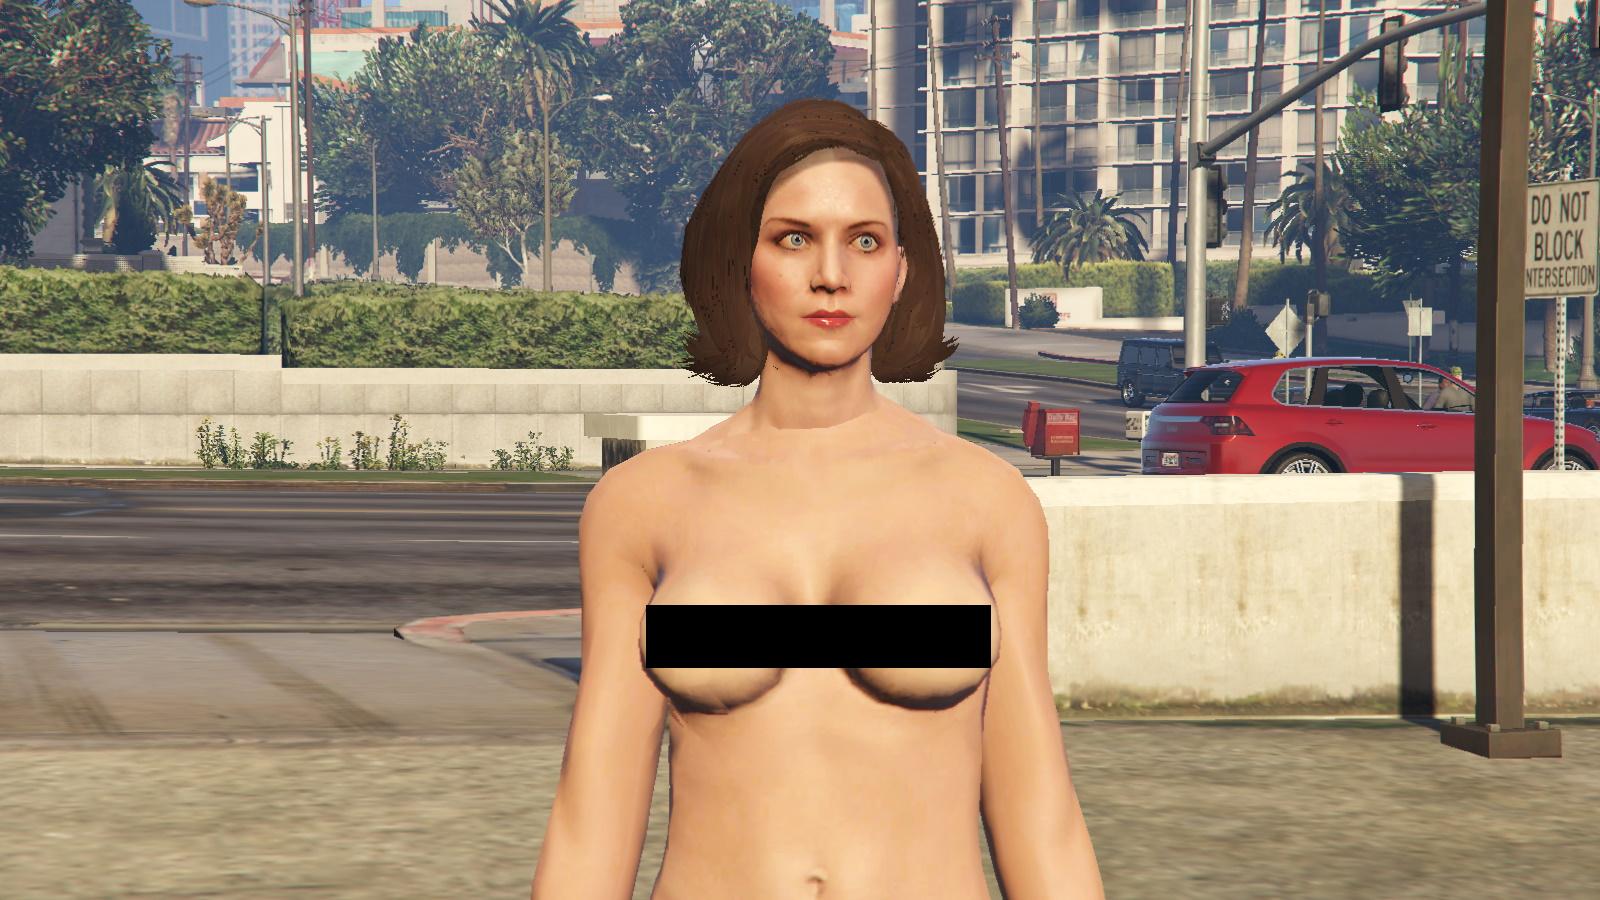 The body and legs were taken from this mod: https://ru.gta5-mods.com/player...